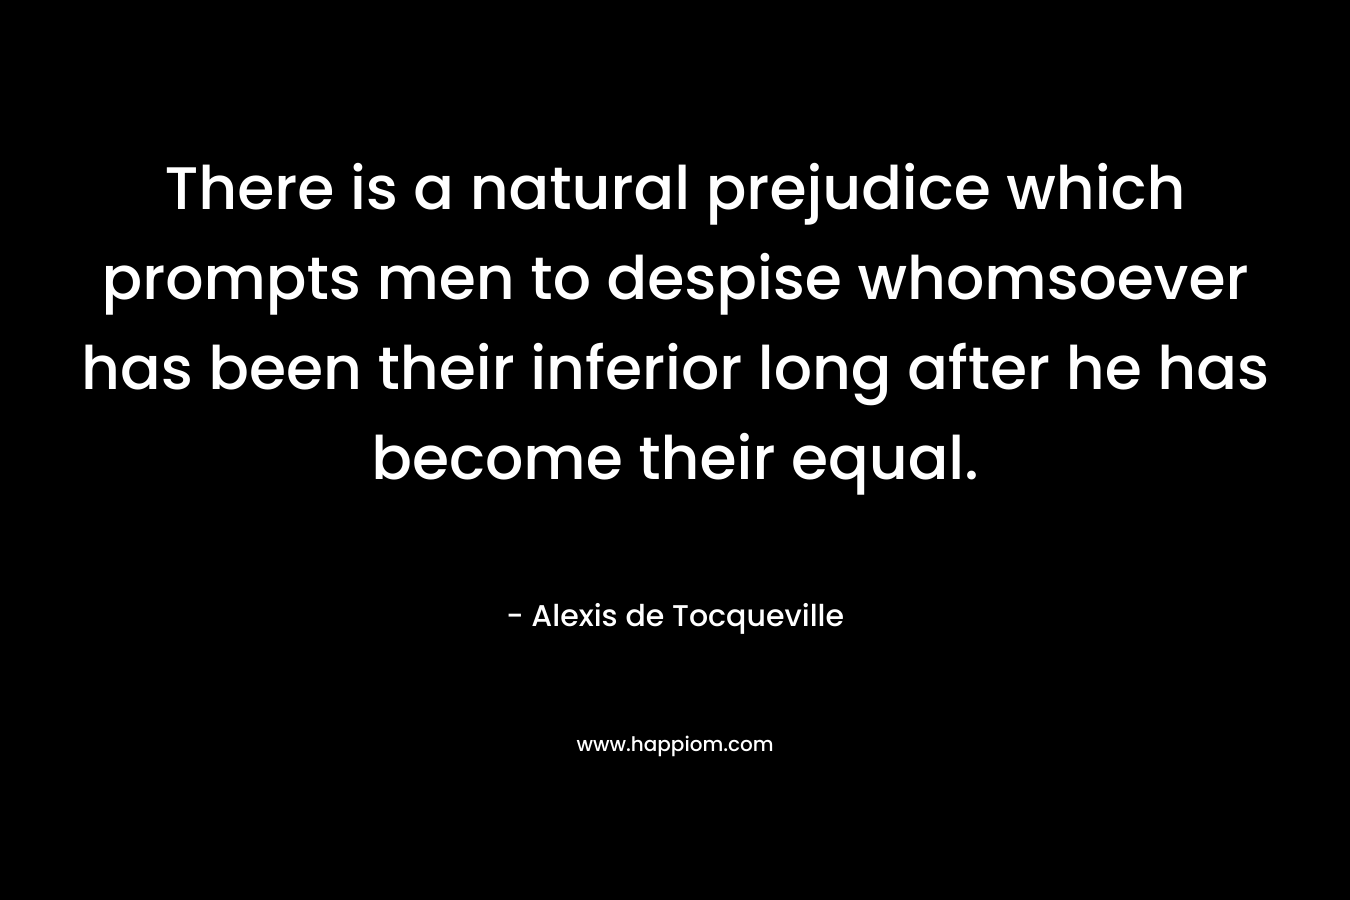 There is a natural prejudice which prompts men to despise whomsoever has been their inferior long after he has become their equal. – Alexis de Tocqueville